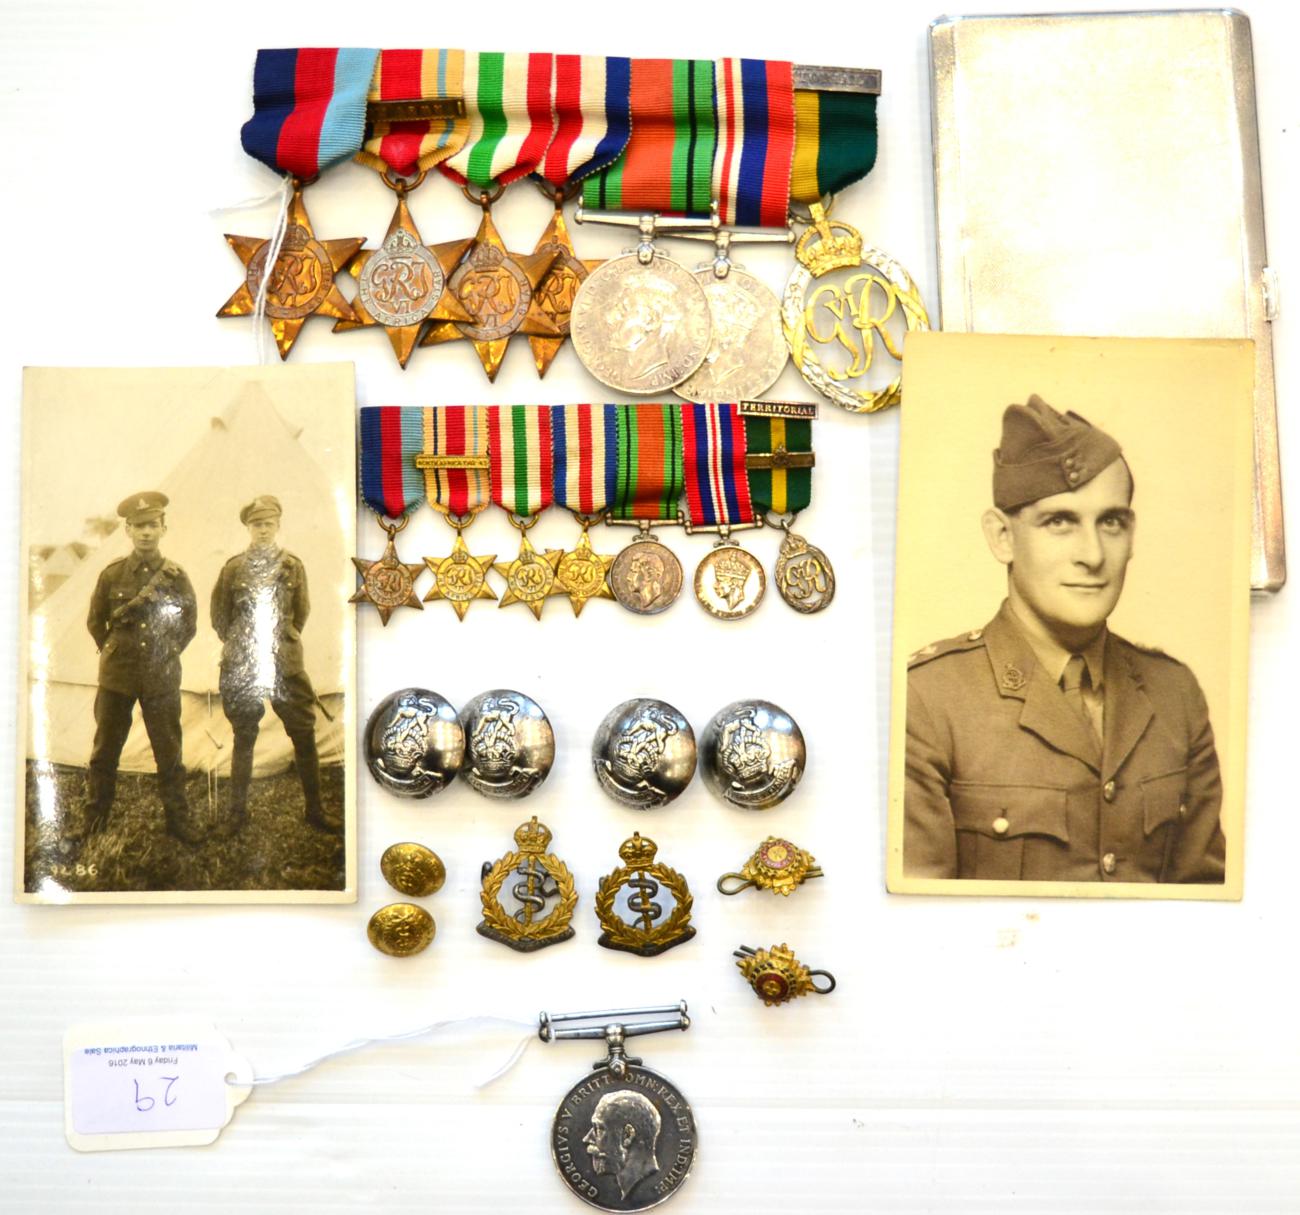 A Second World War Group of Seven Medals to a Lieutenant of the Royal Army Medical Corps, comprising